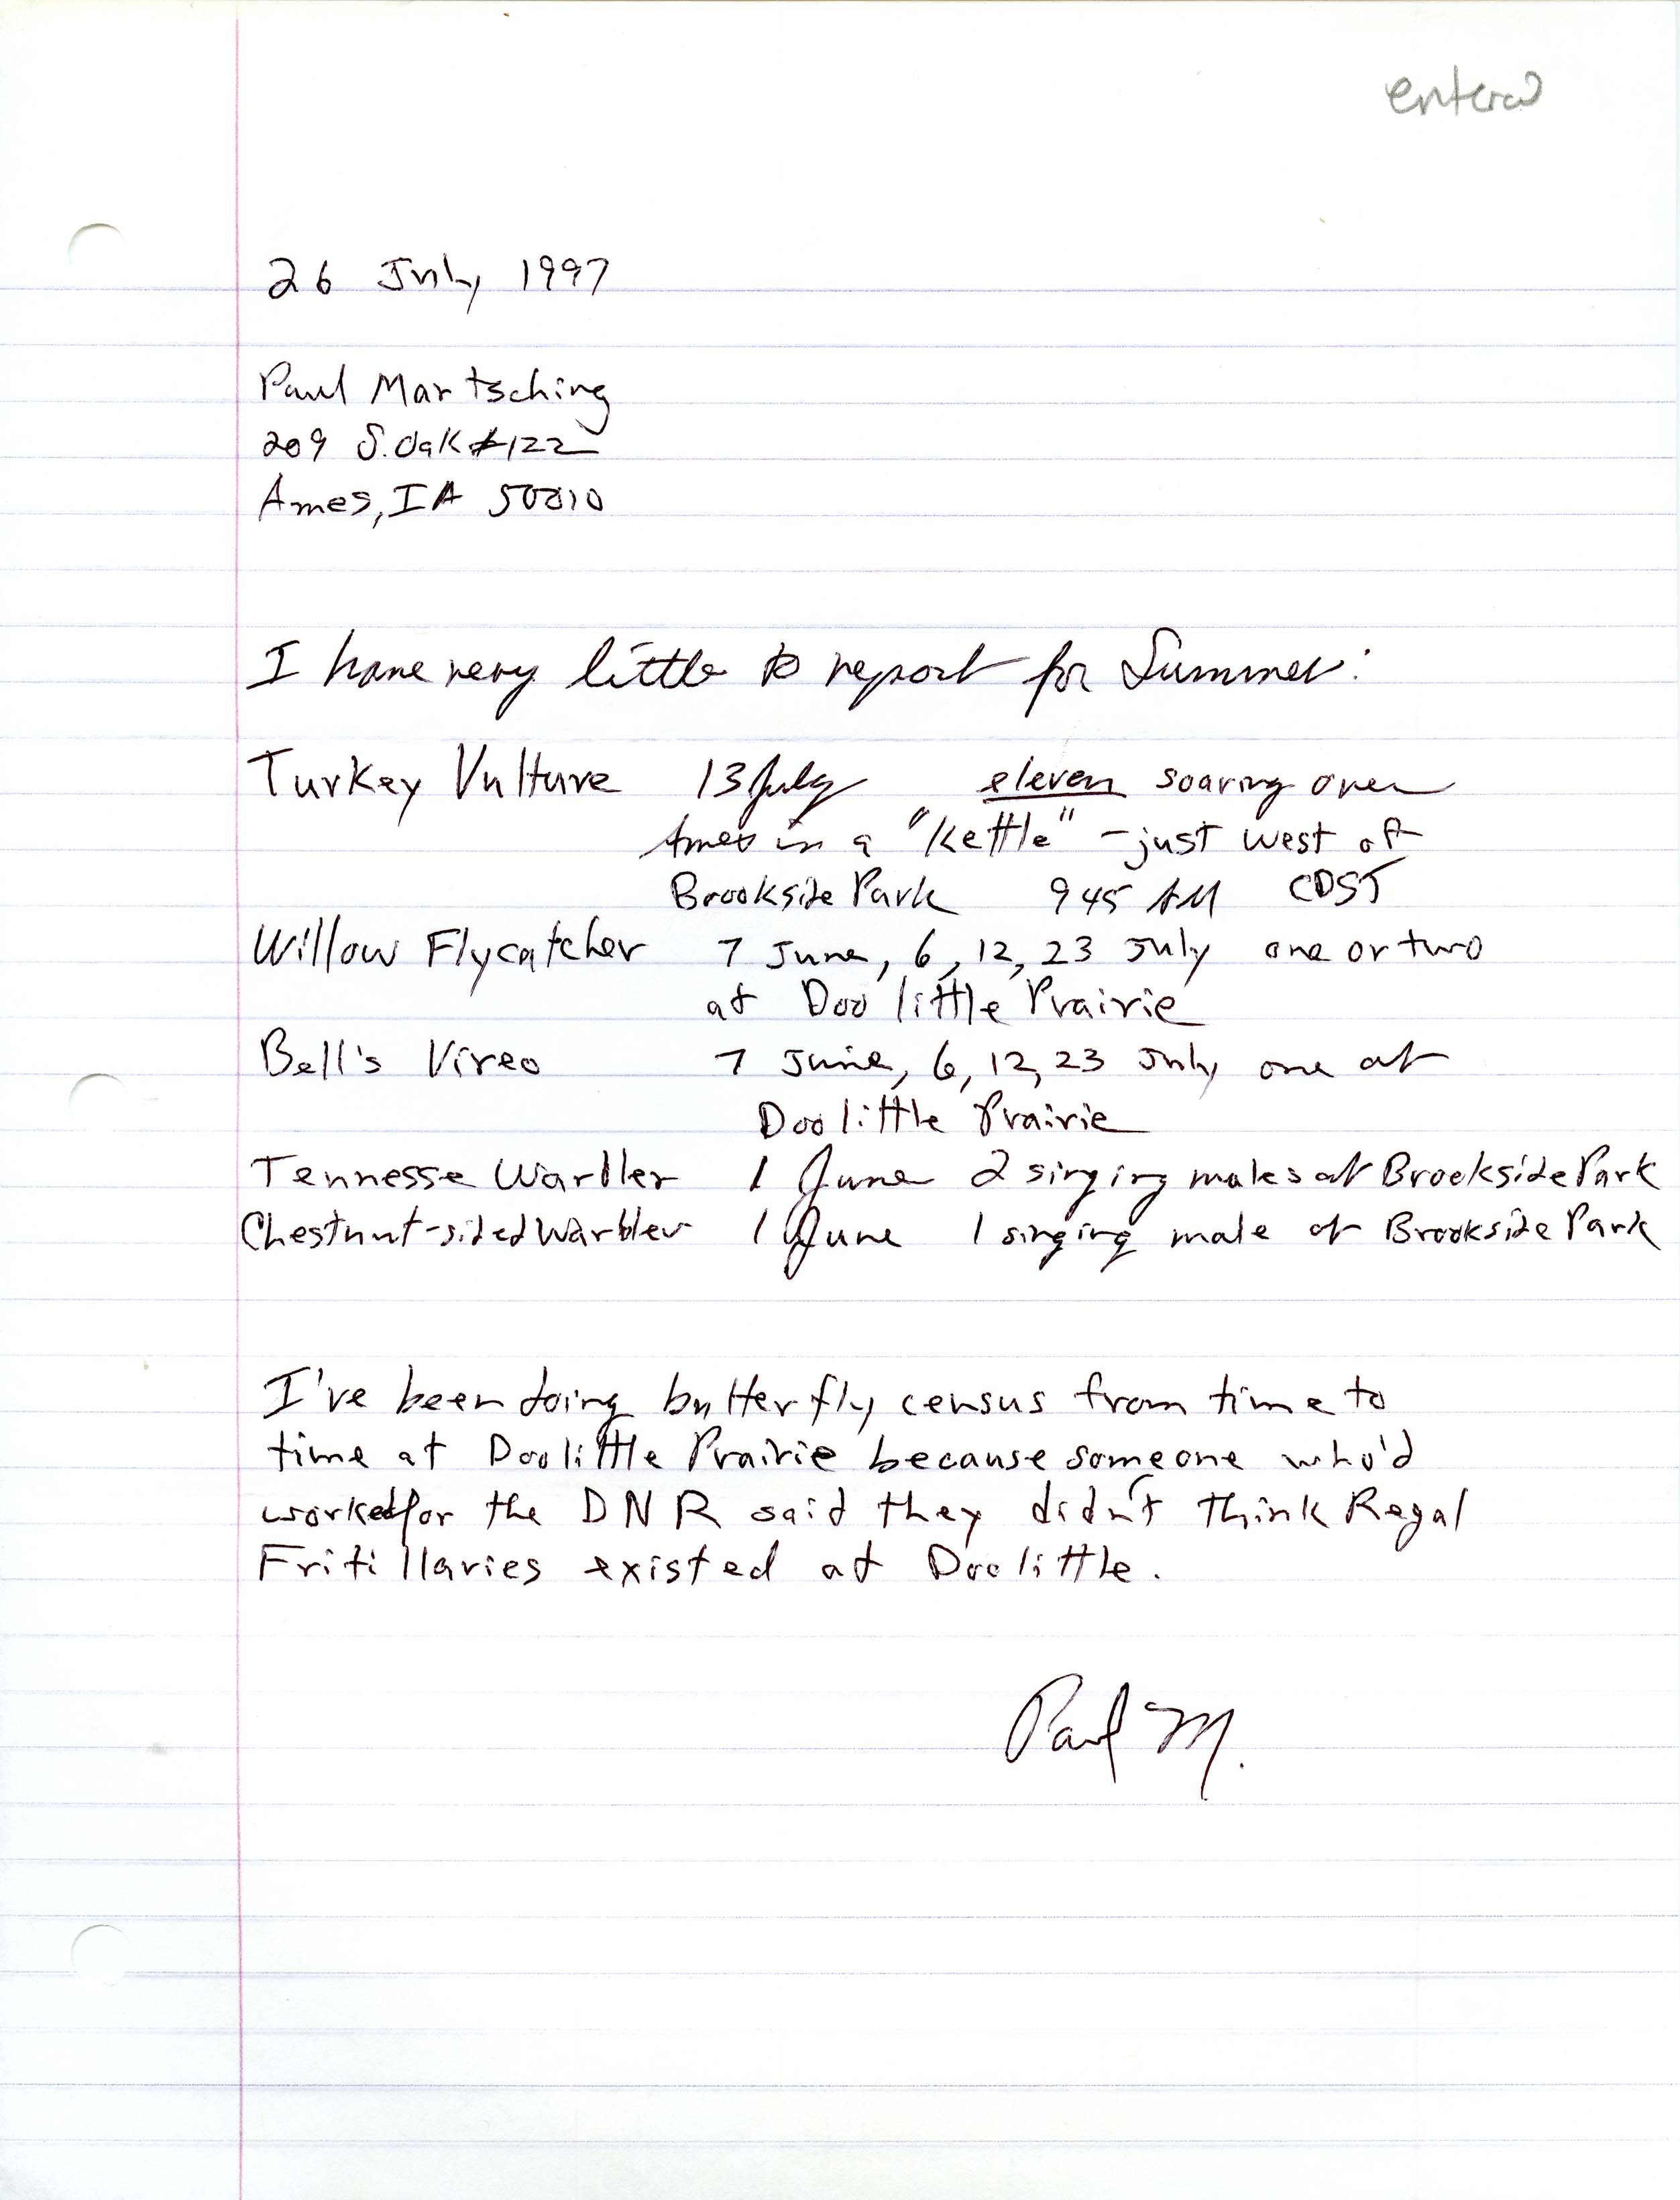 Field notes contributed by Paul Martsching, July 26, 1997